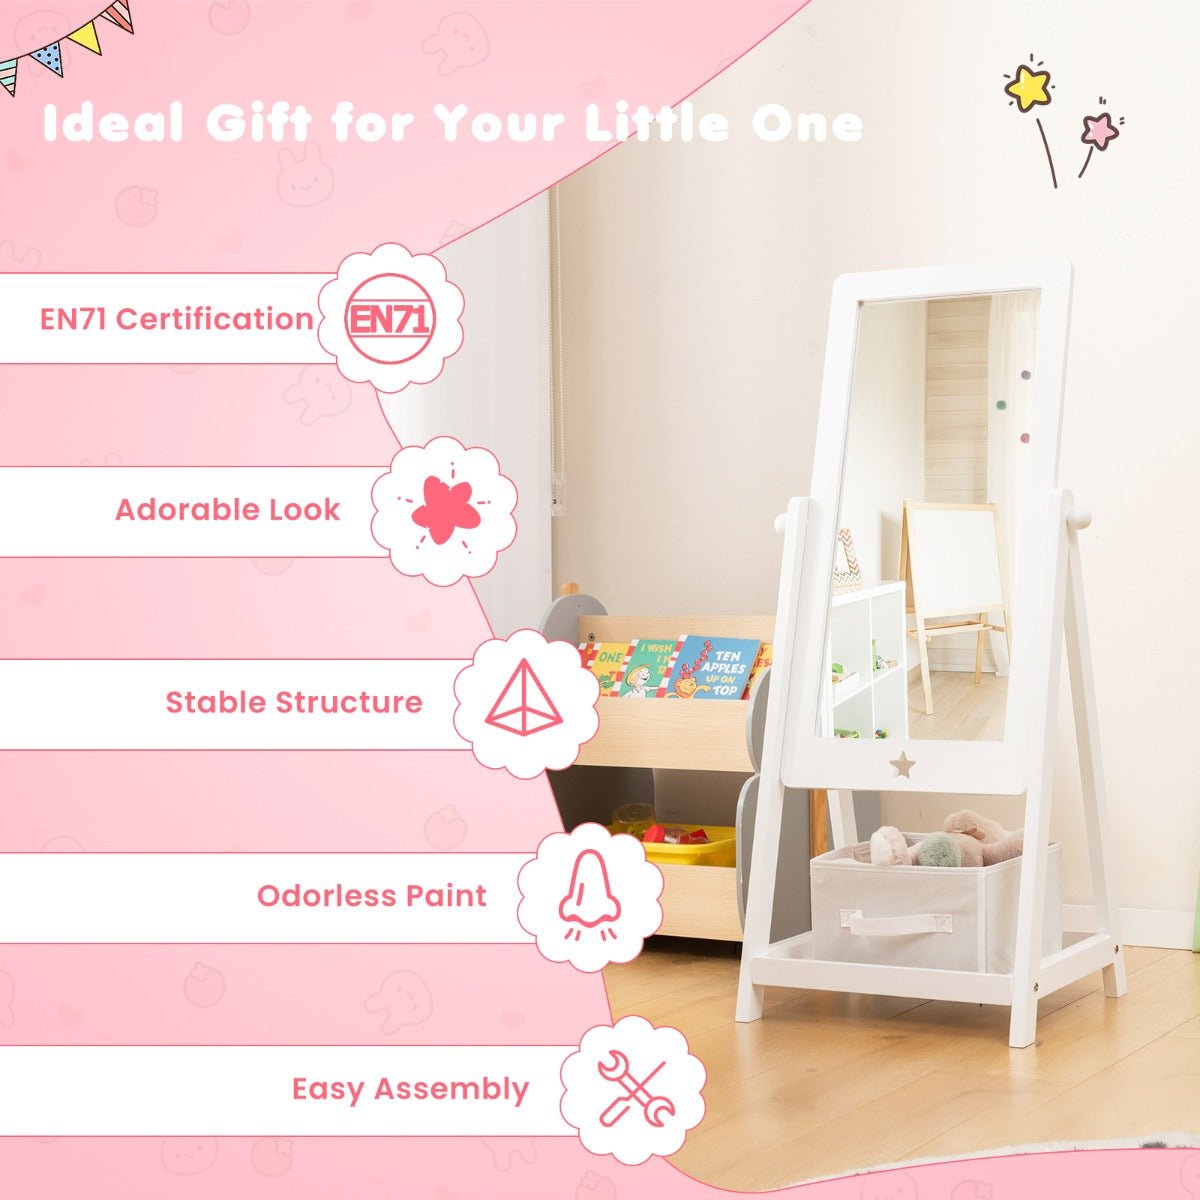 Adjustable and Adorable Mirror for Kids - Shop Now!